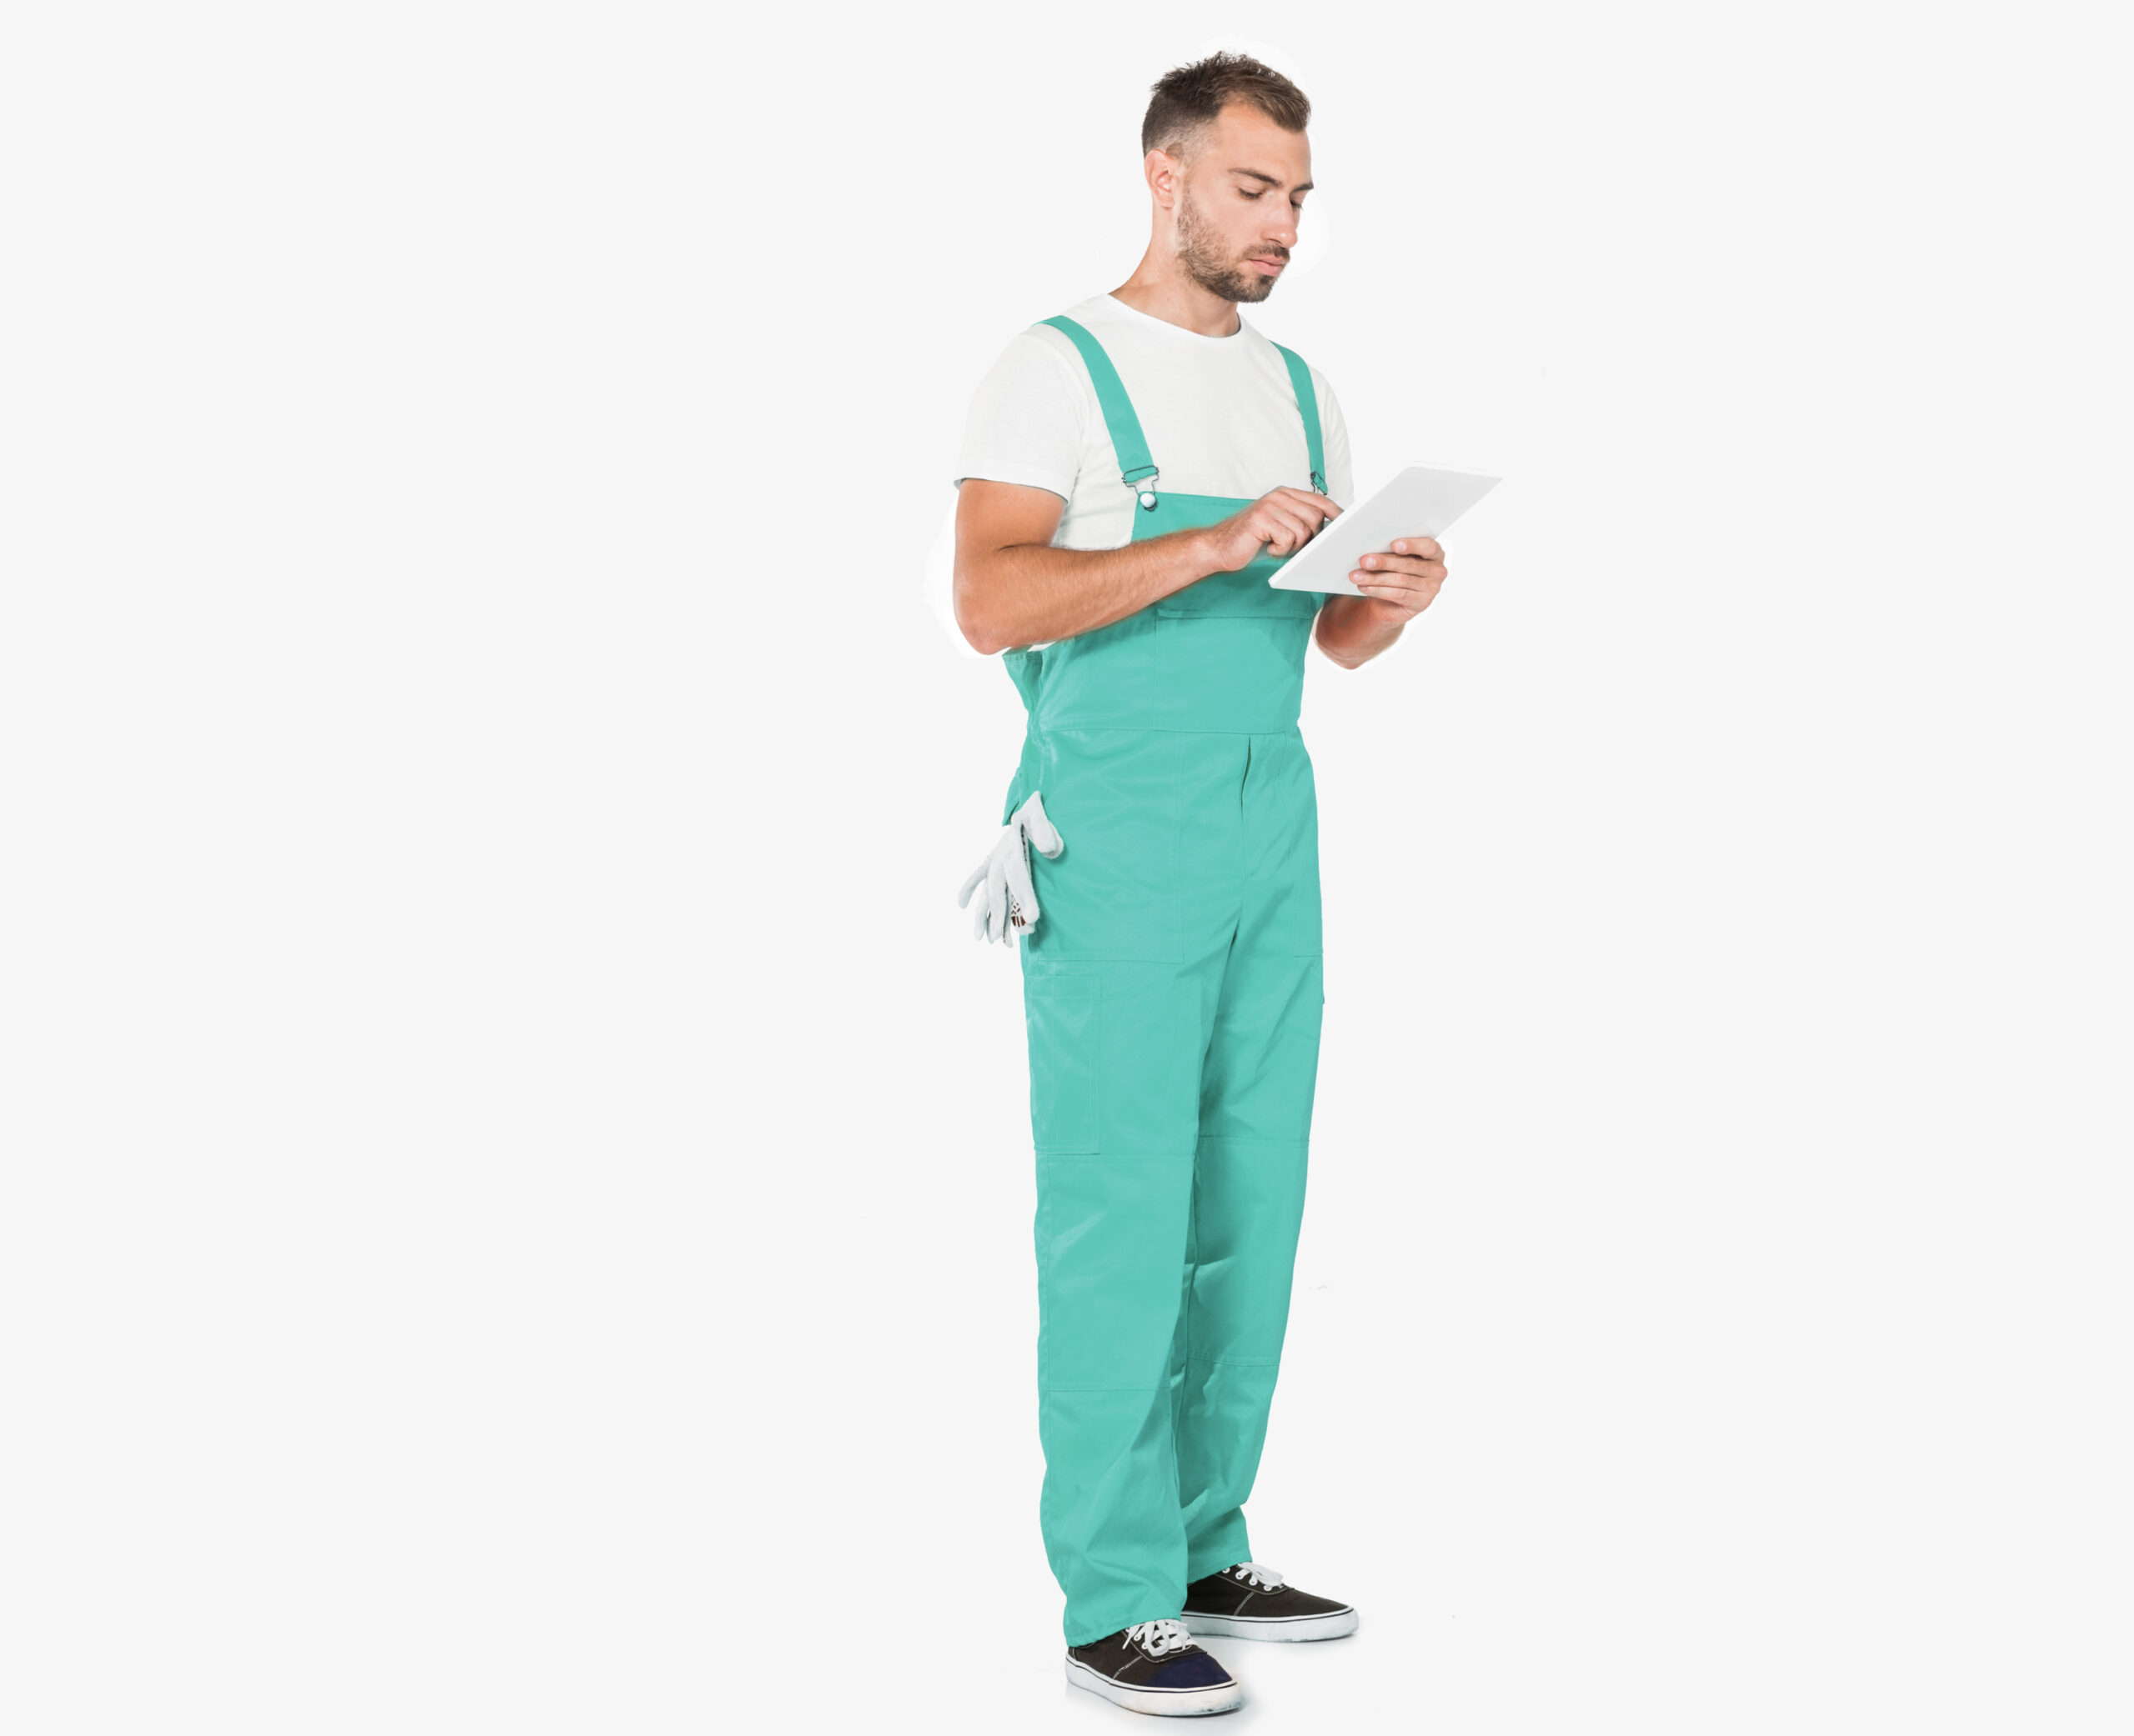 A mechanic in green overalls.